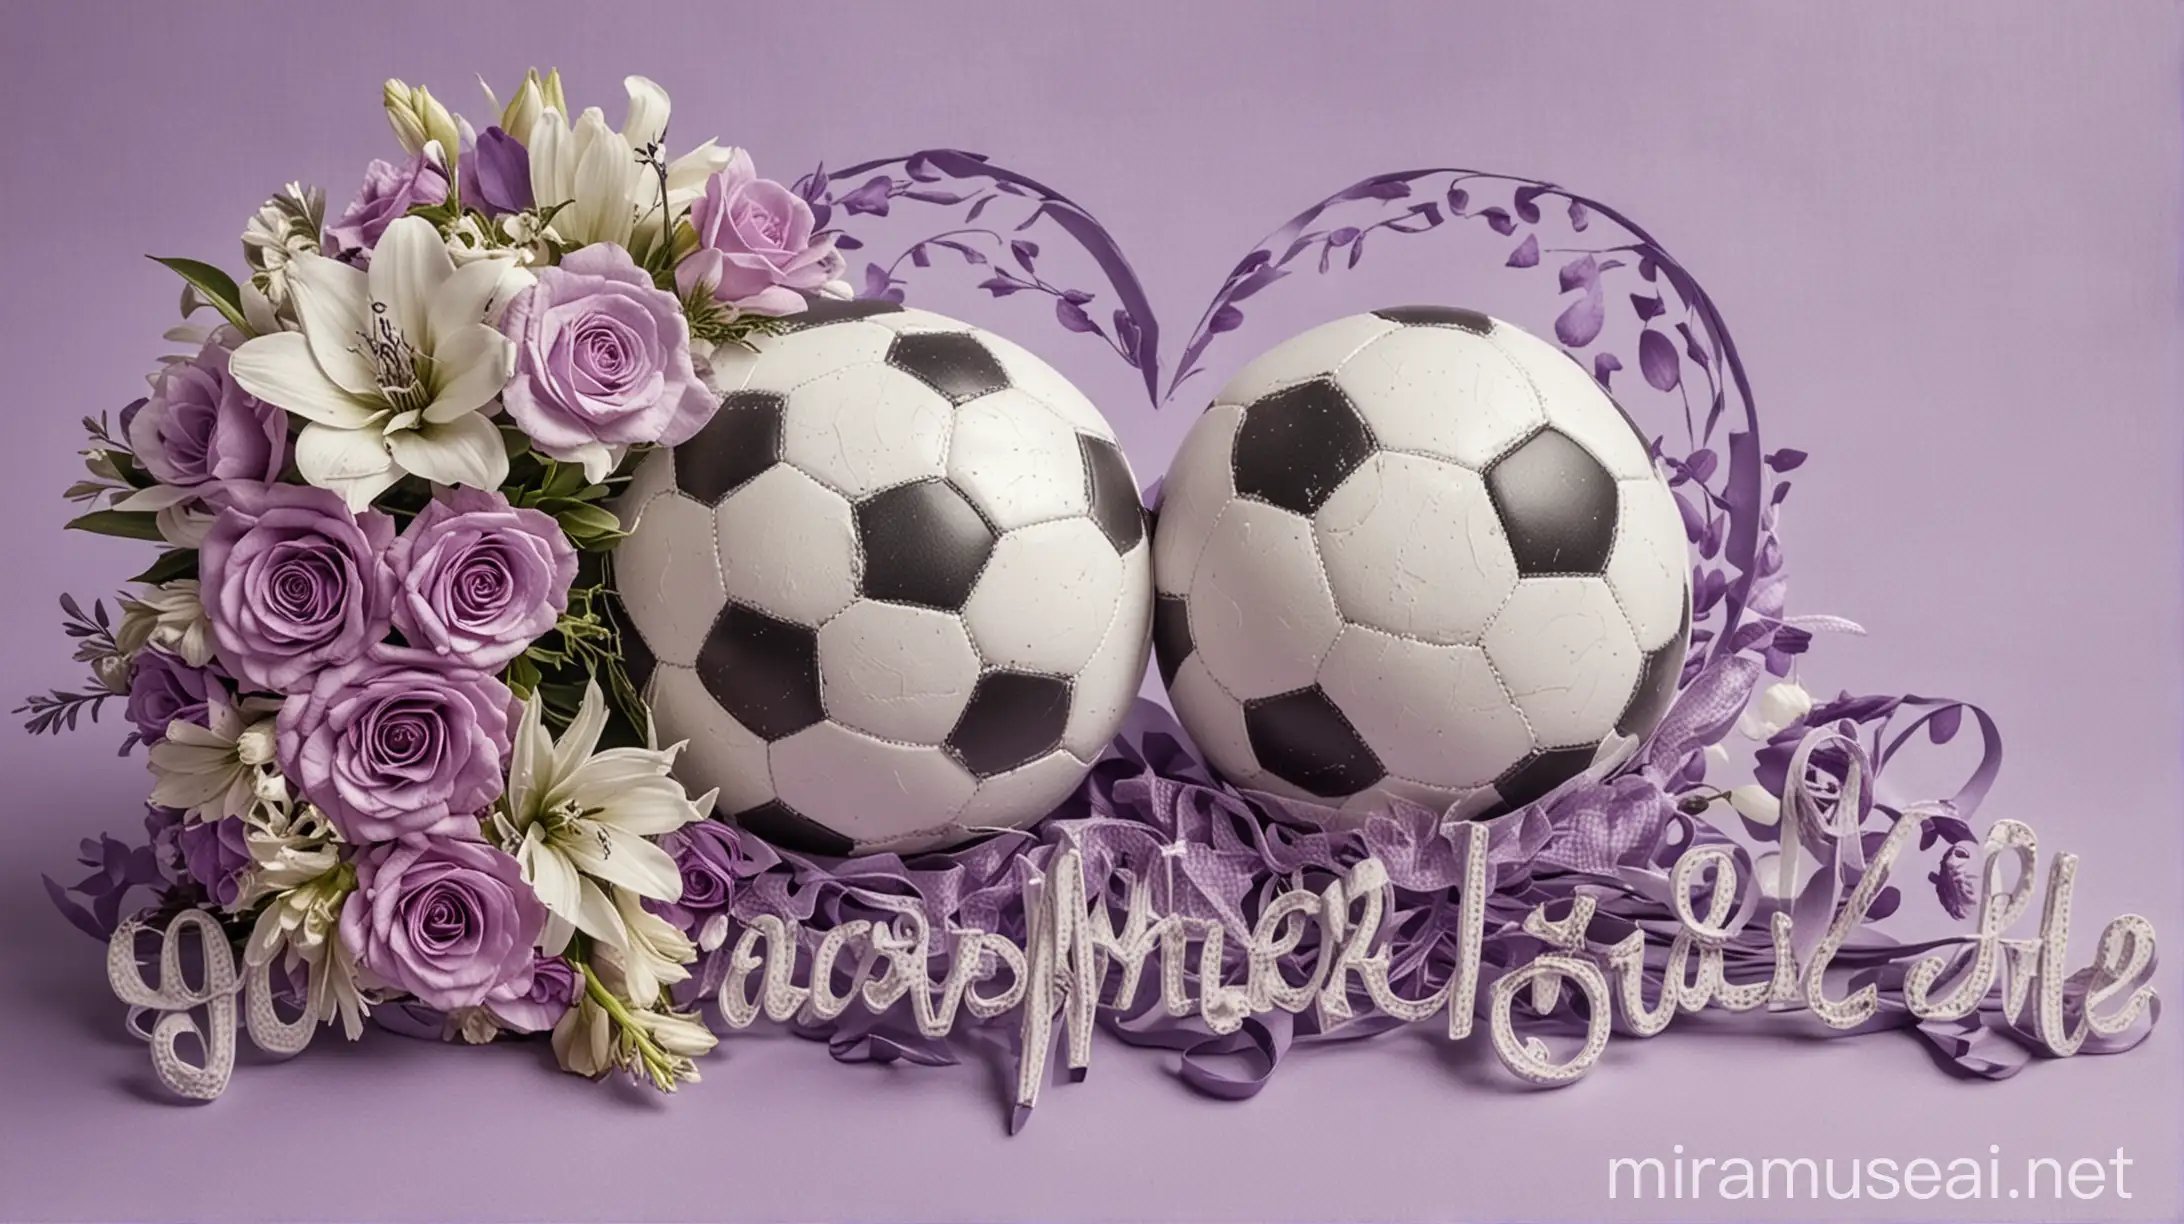 /pencil style /design a wedding greeting card for Ricsi and Anett featuring soccer and love /use soft violet tones /use flowers and soccer balls